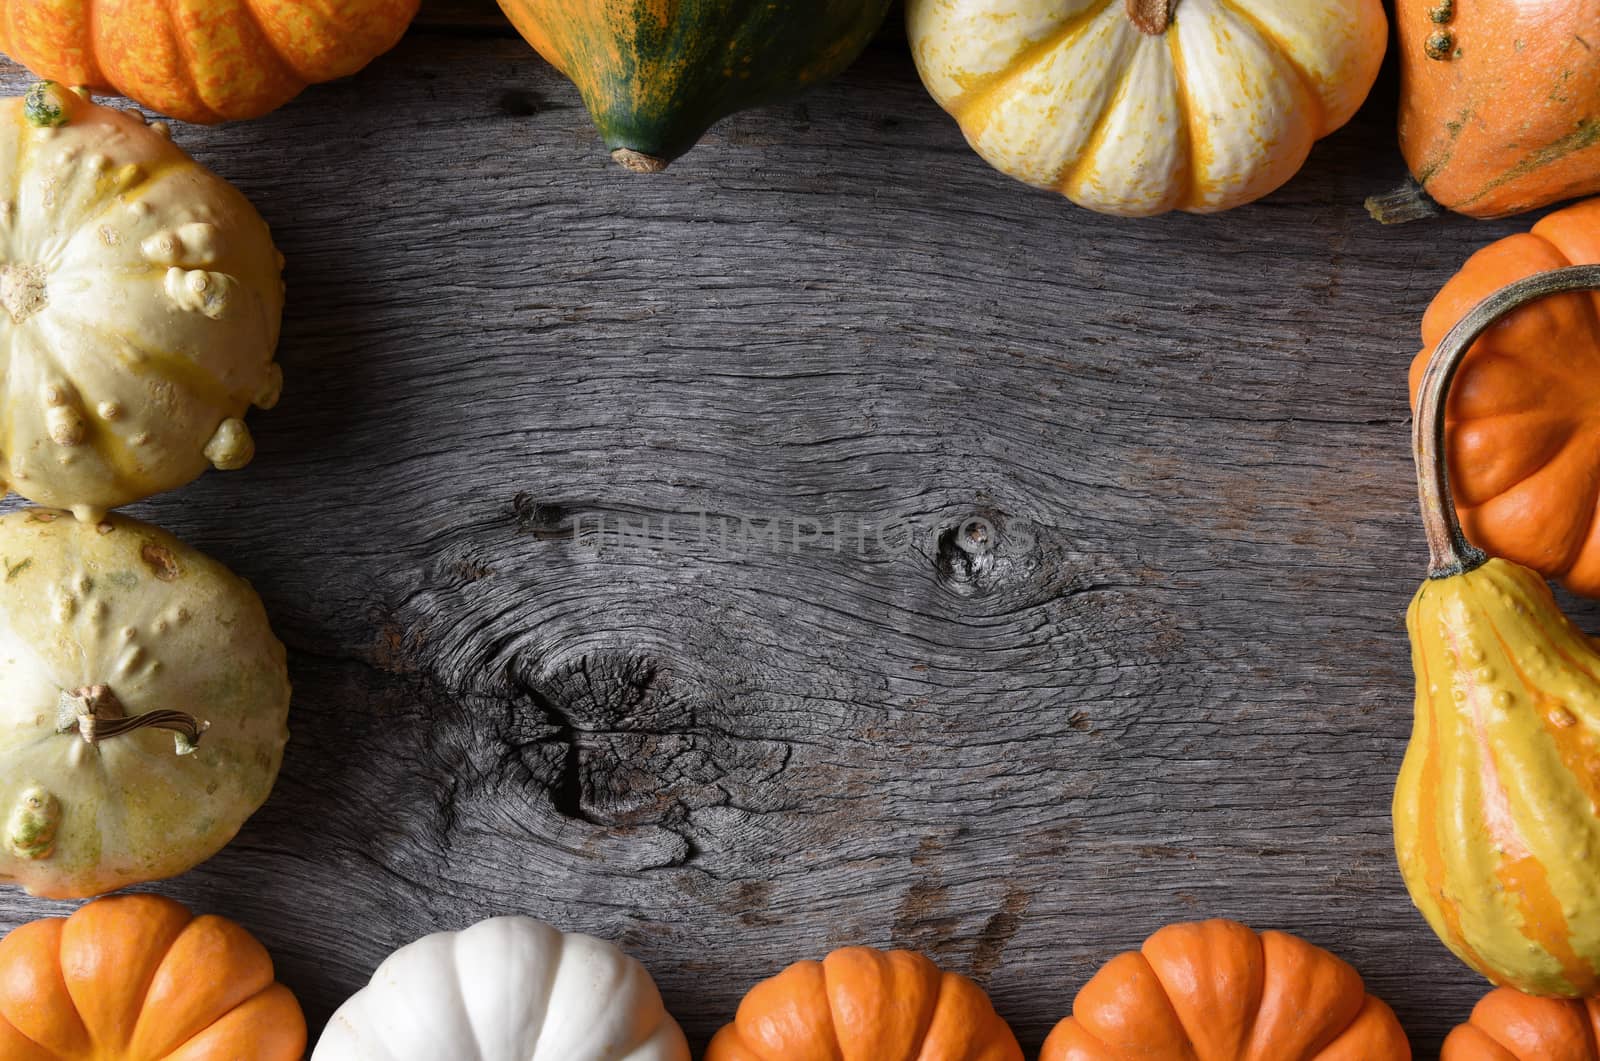 Closeup shot of a group of decorative Pumpkins, Squash and Gourds on a rustic wood table. The vegetables form a frame.